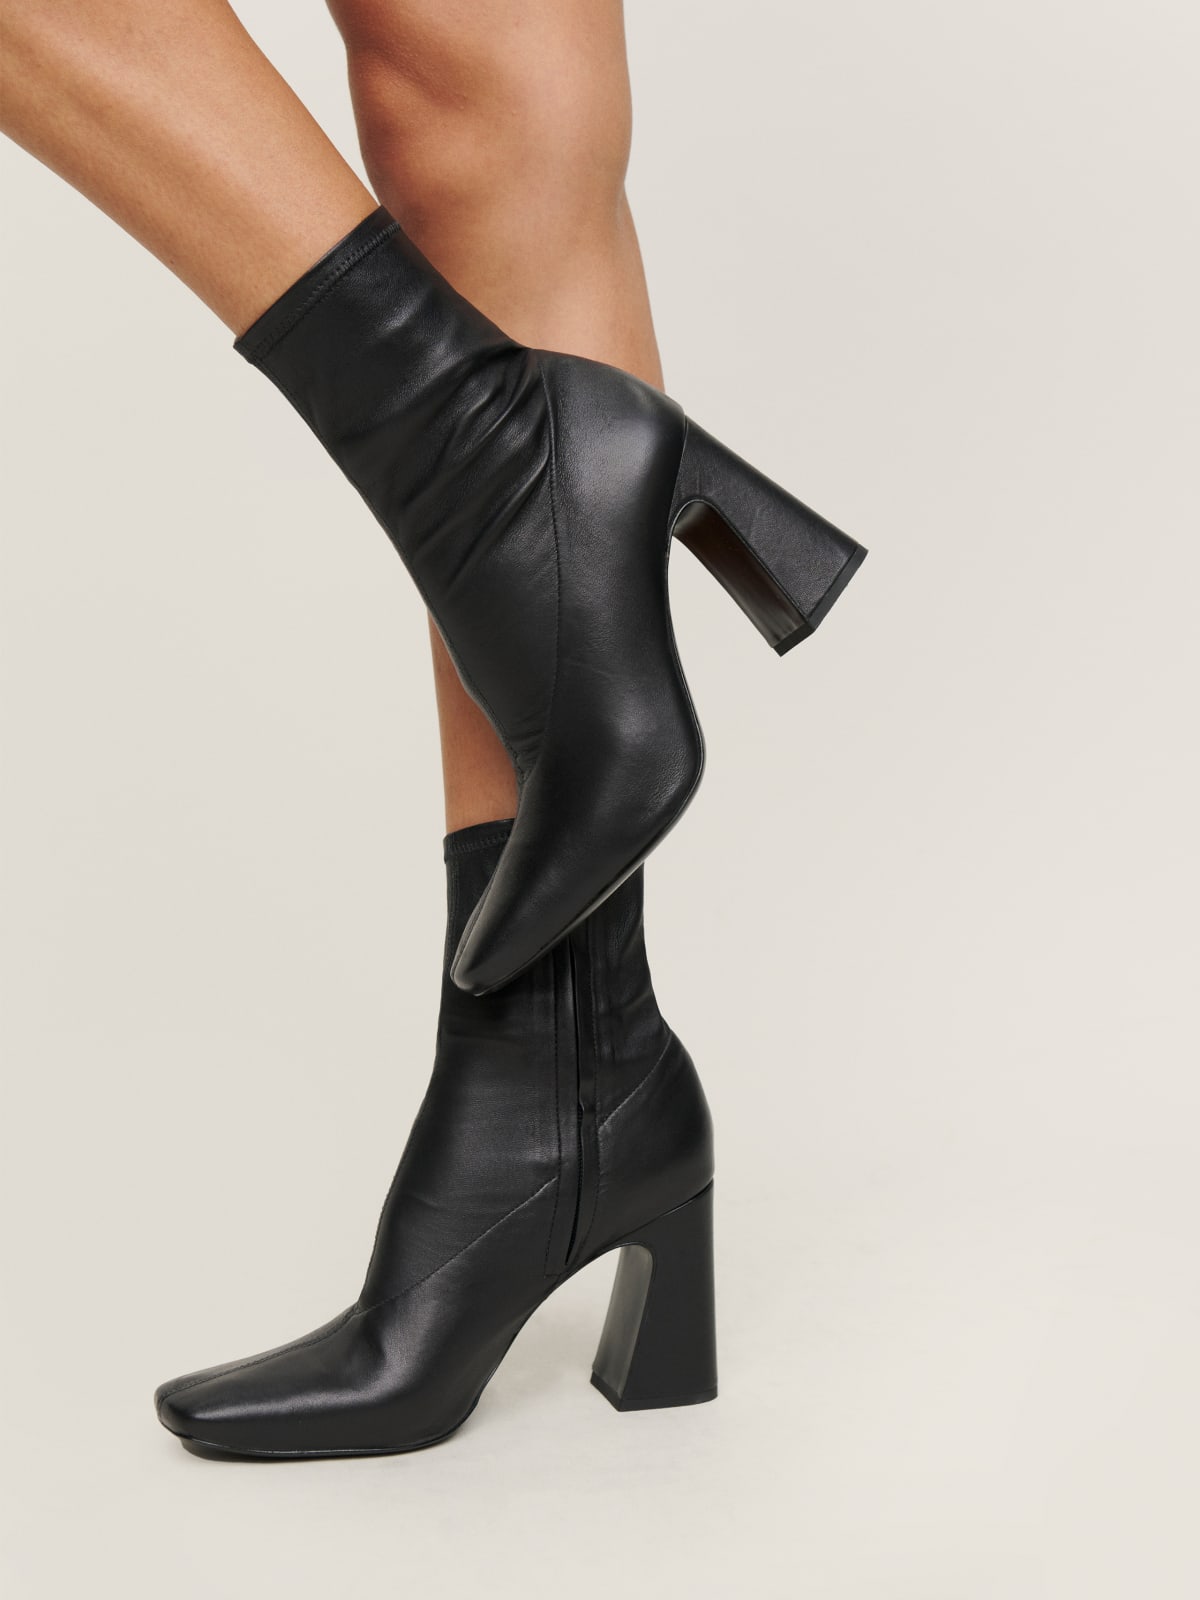 Black ankle boots from Reformation